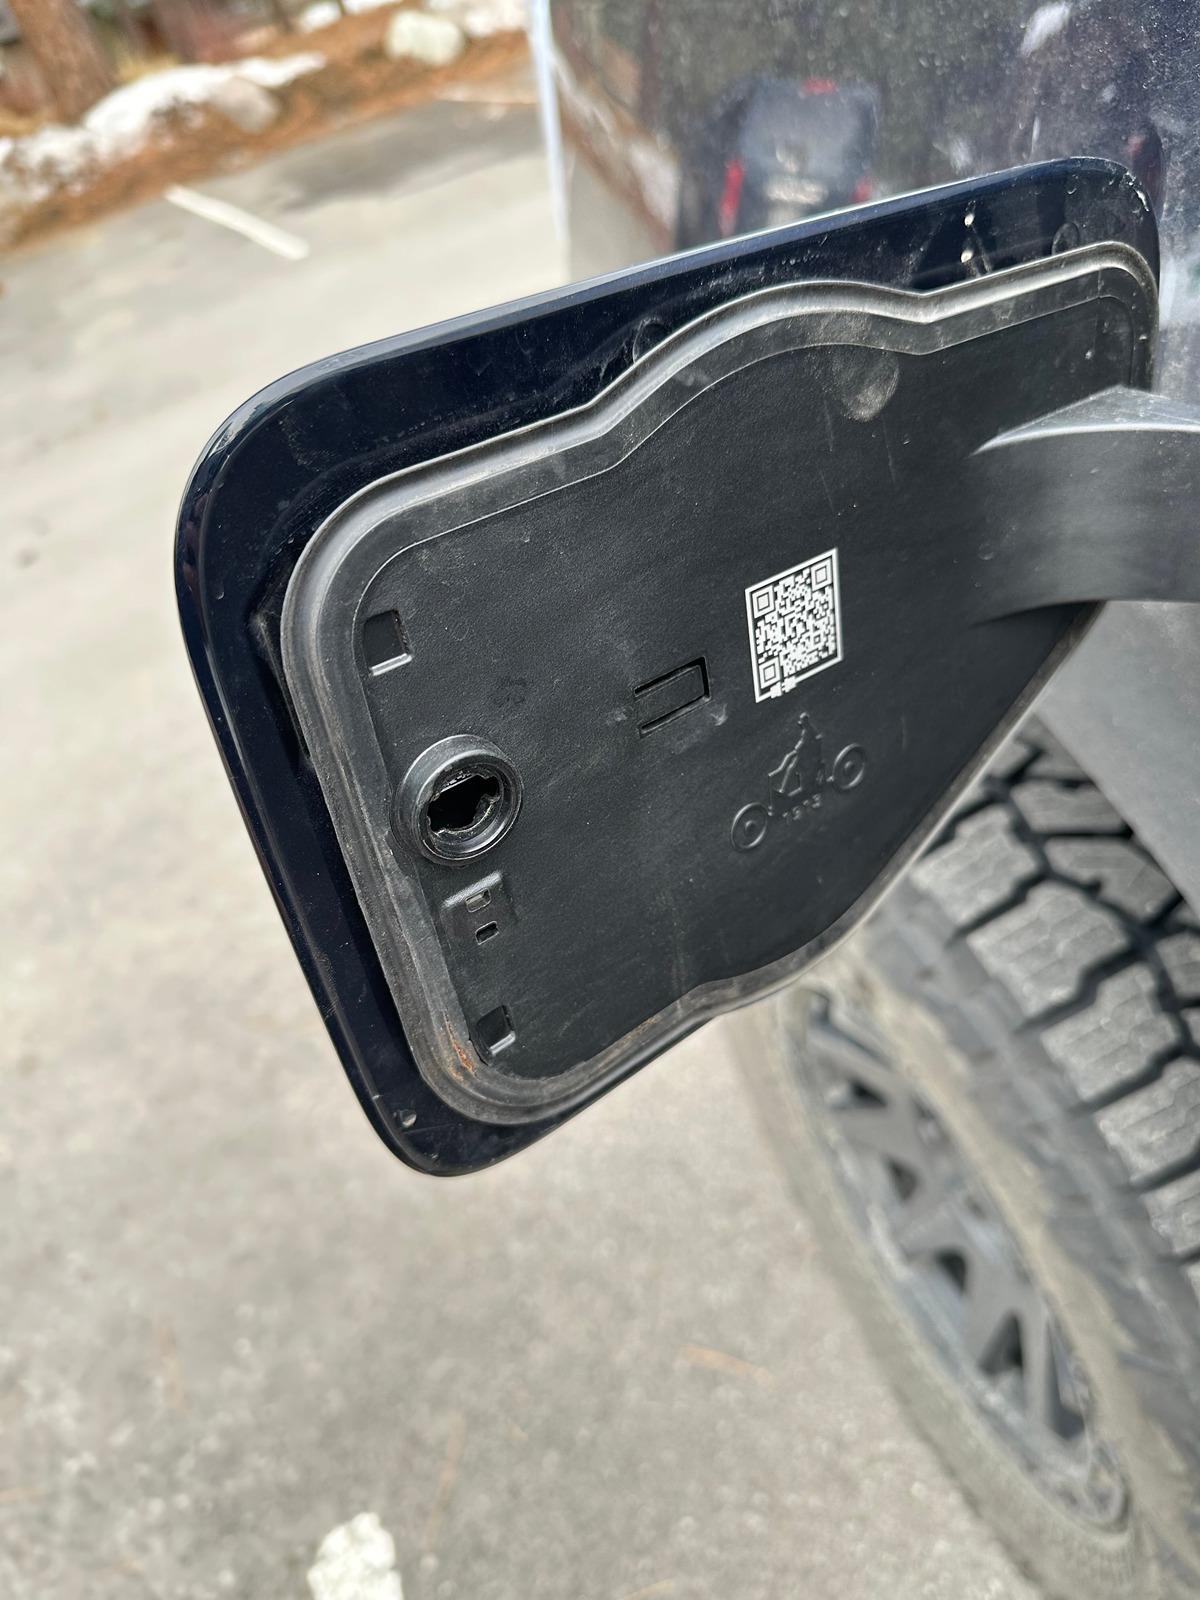 Ford F-150 Lightning Charge port door for sale without cover plate $125 IMG_2662